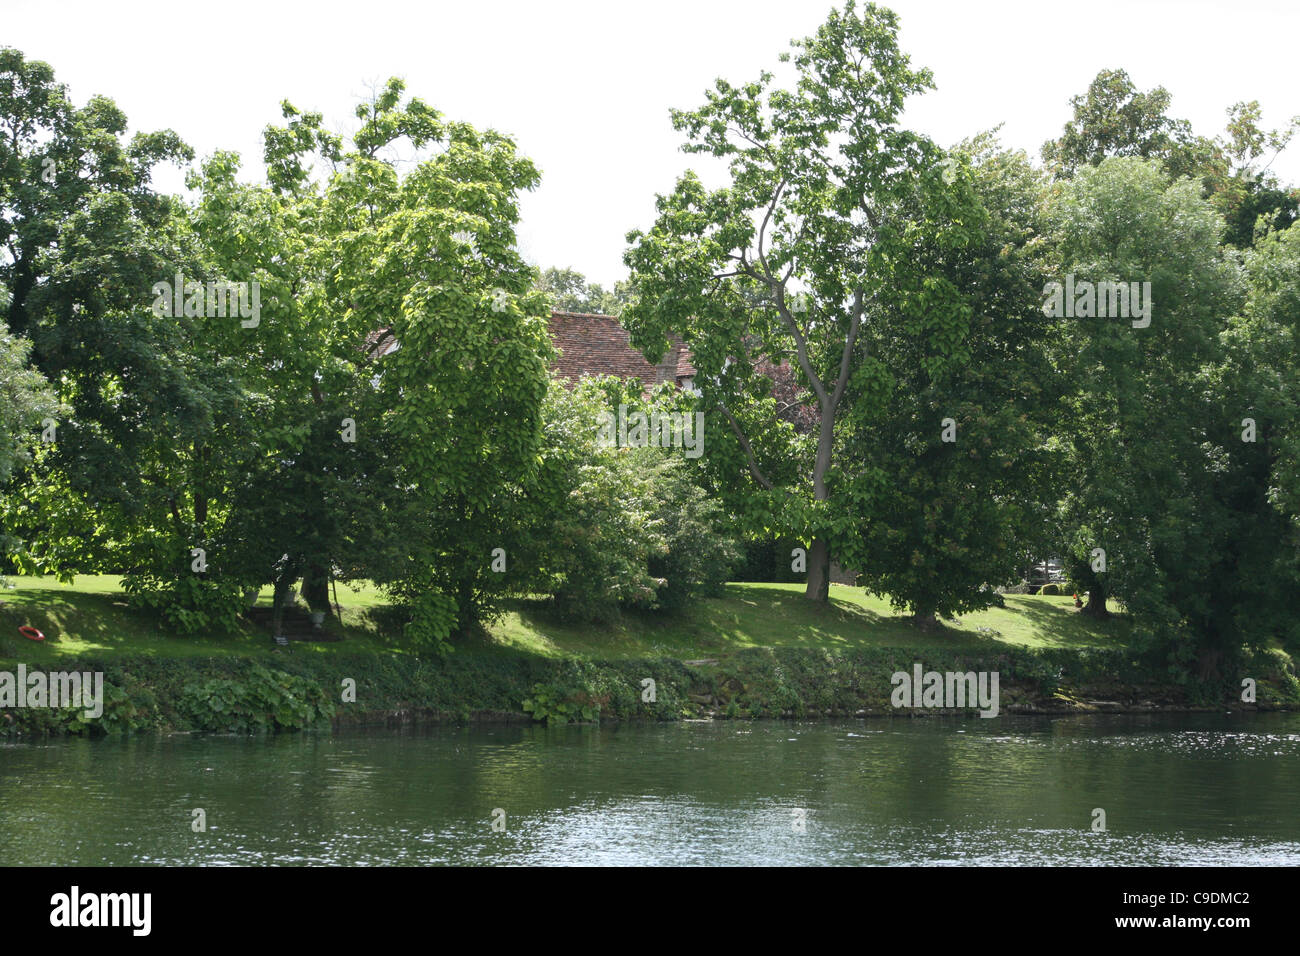 River Thames in the foreground with bank of trees in the background. Stock Photo